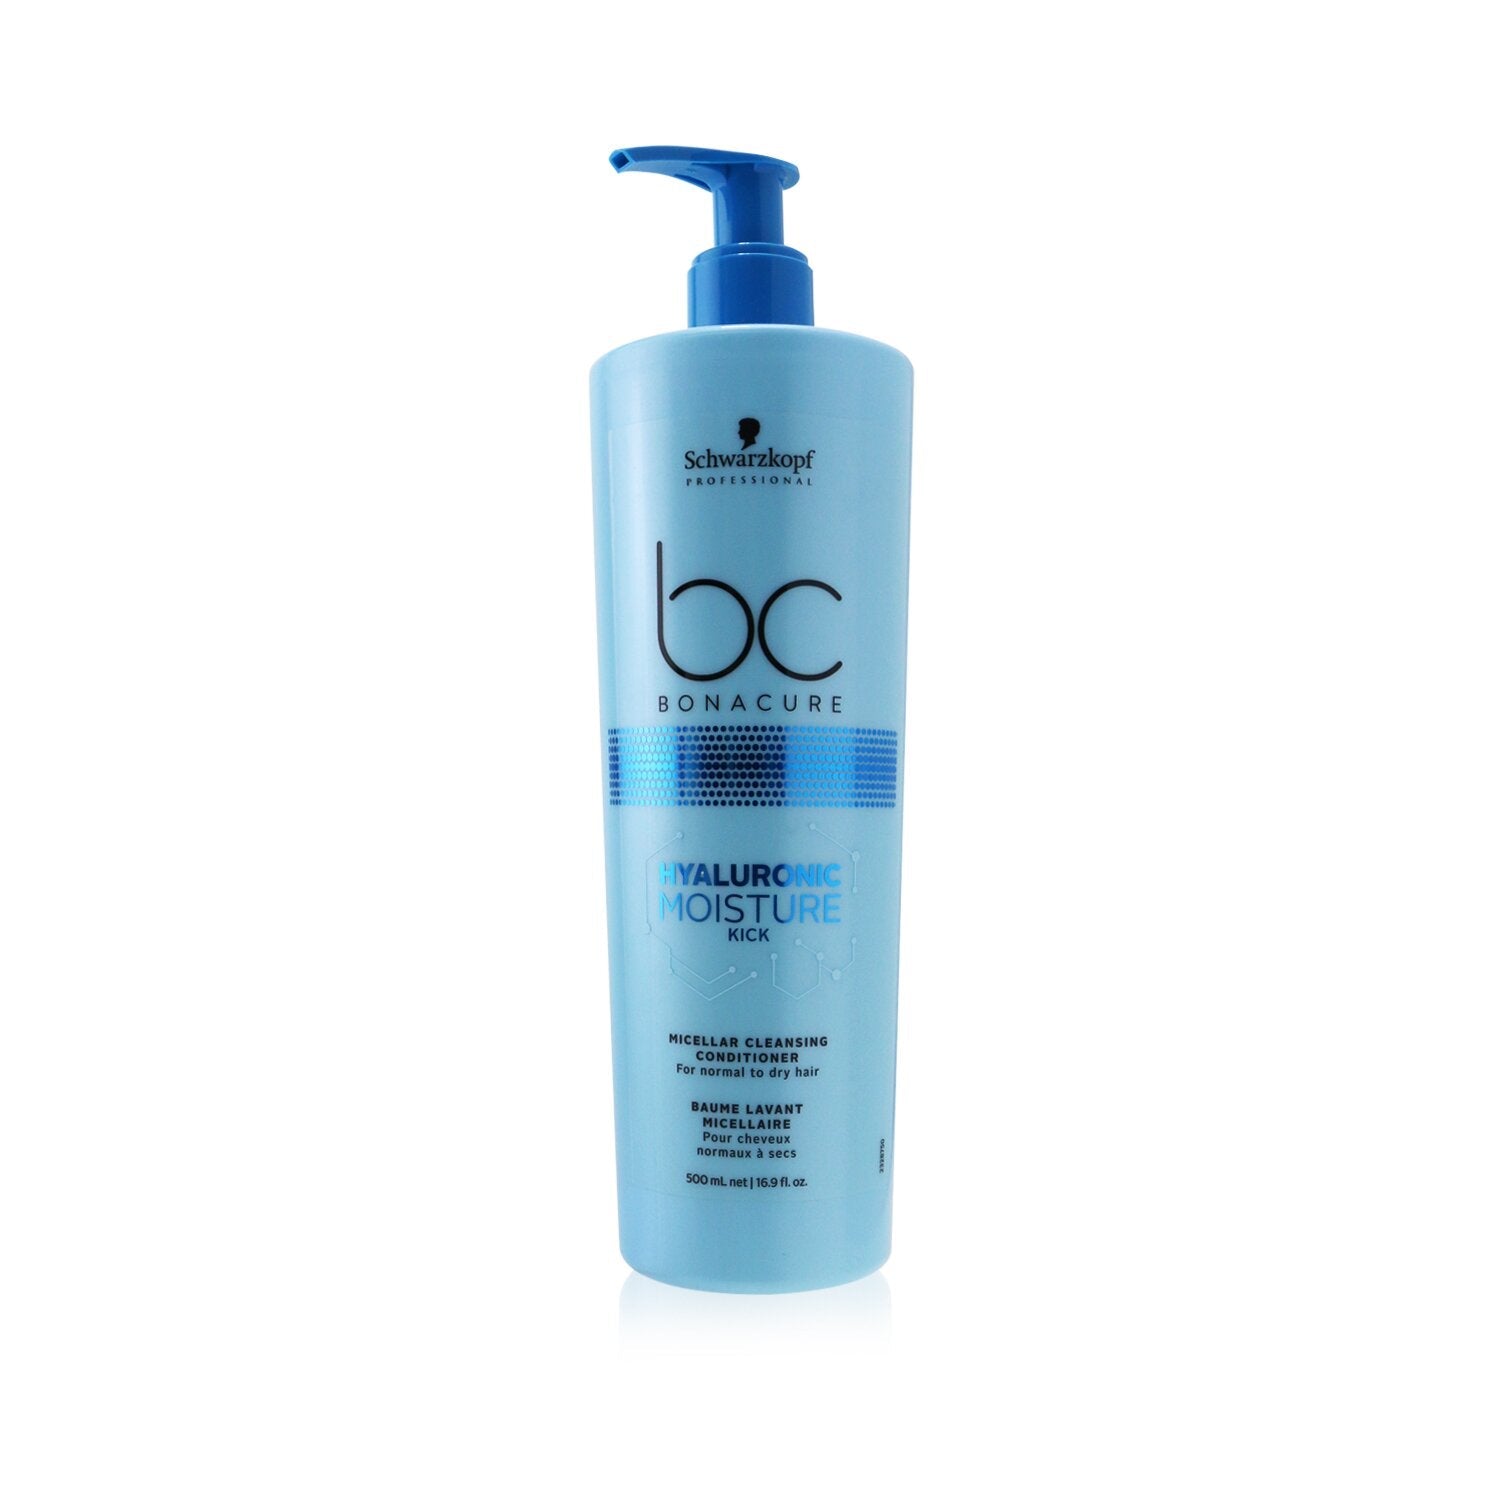 BC Bonacure Hyaluronic Moisture Kick Micellar Cleansing Conditioner (For Normal to Dry Hair) – Beauty Co. USA